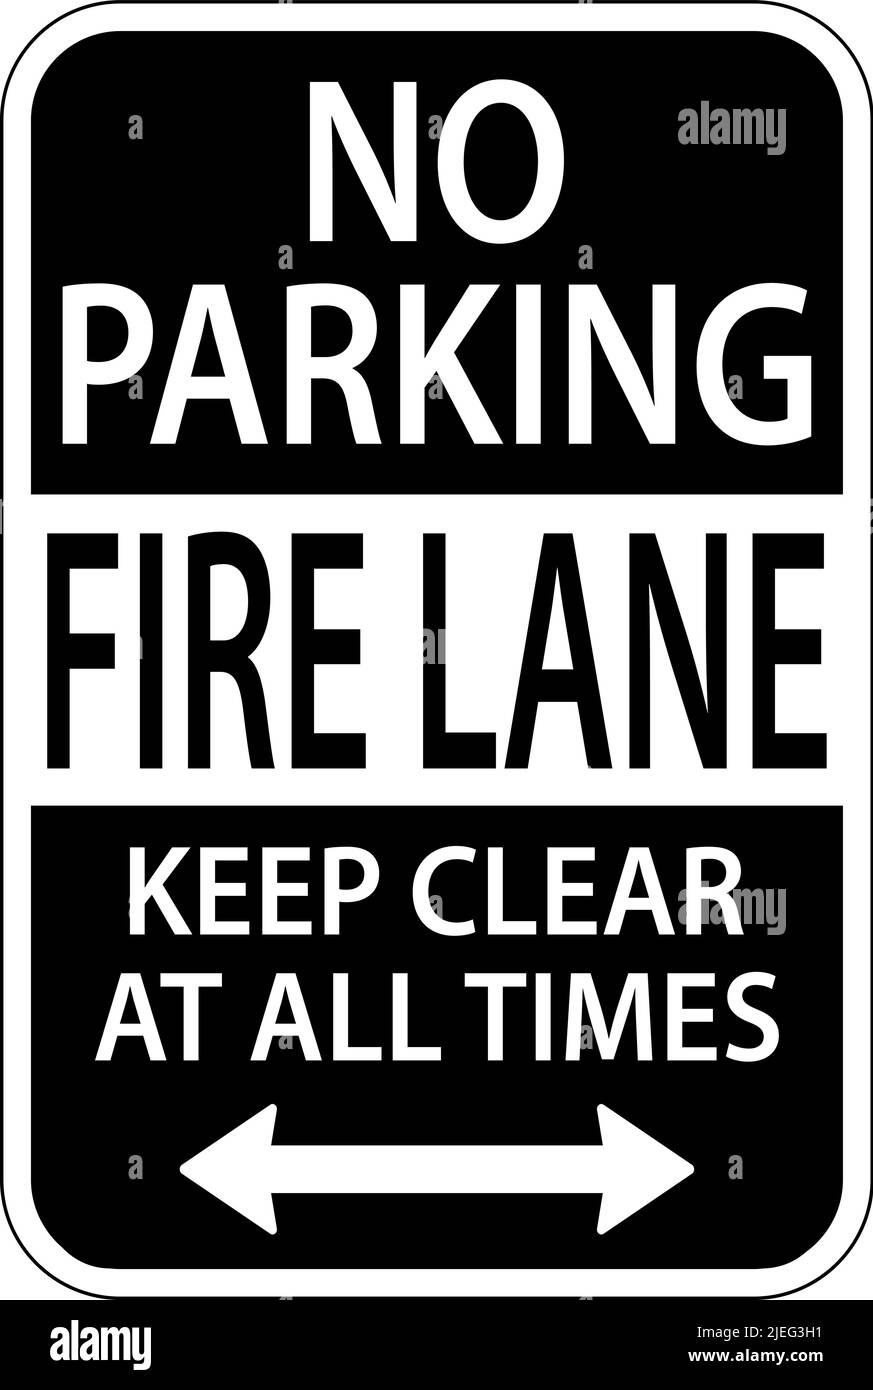 Fire Lane Keep Clear At All Times Sign On White Background Stock Vector